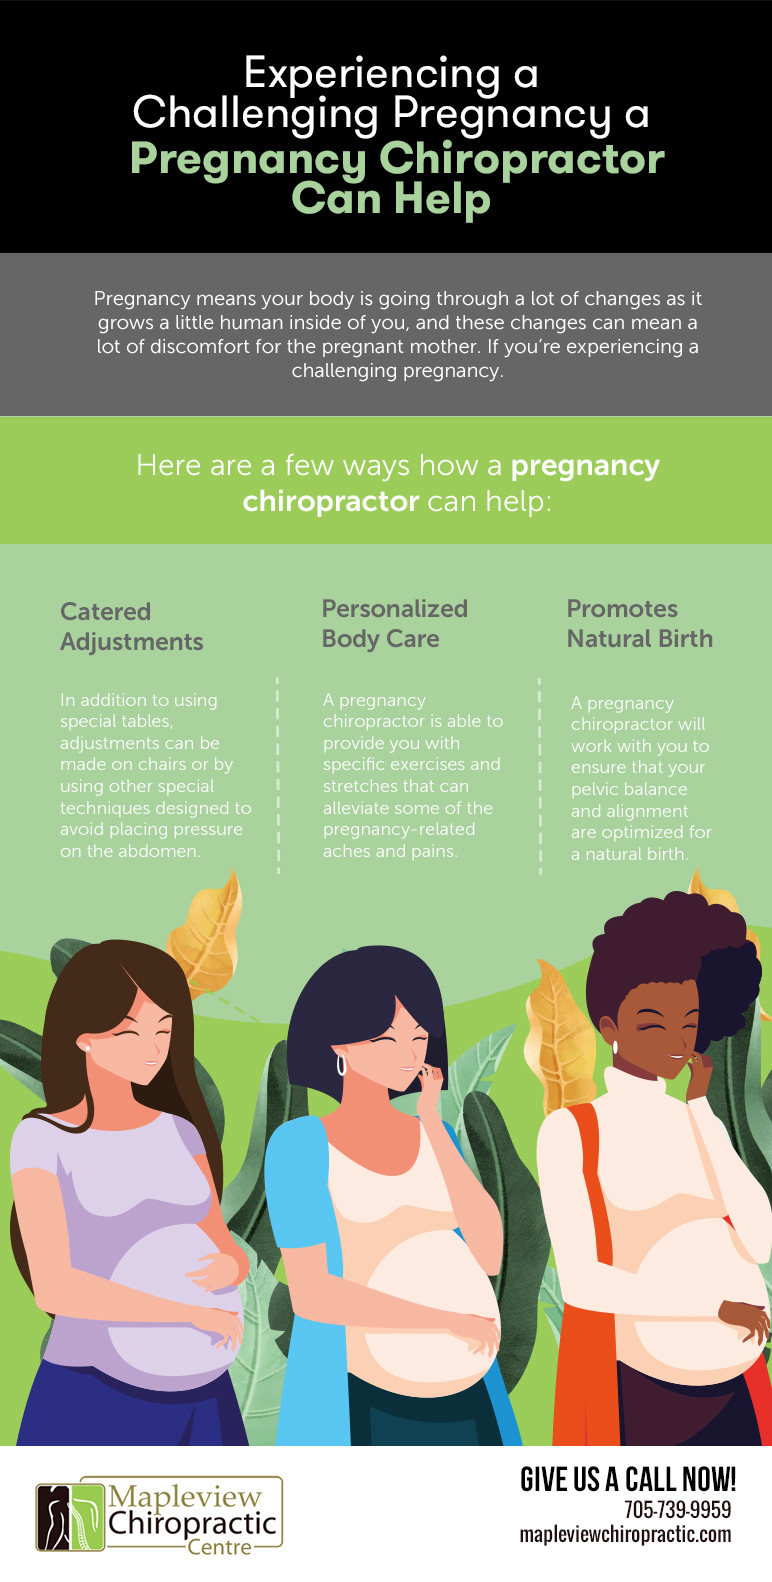 Experiencing a challenging pregnancy a pregnancy chiropractor can help